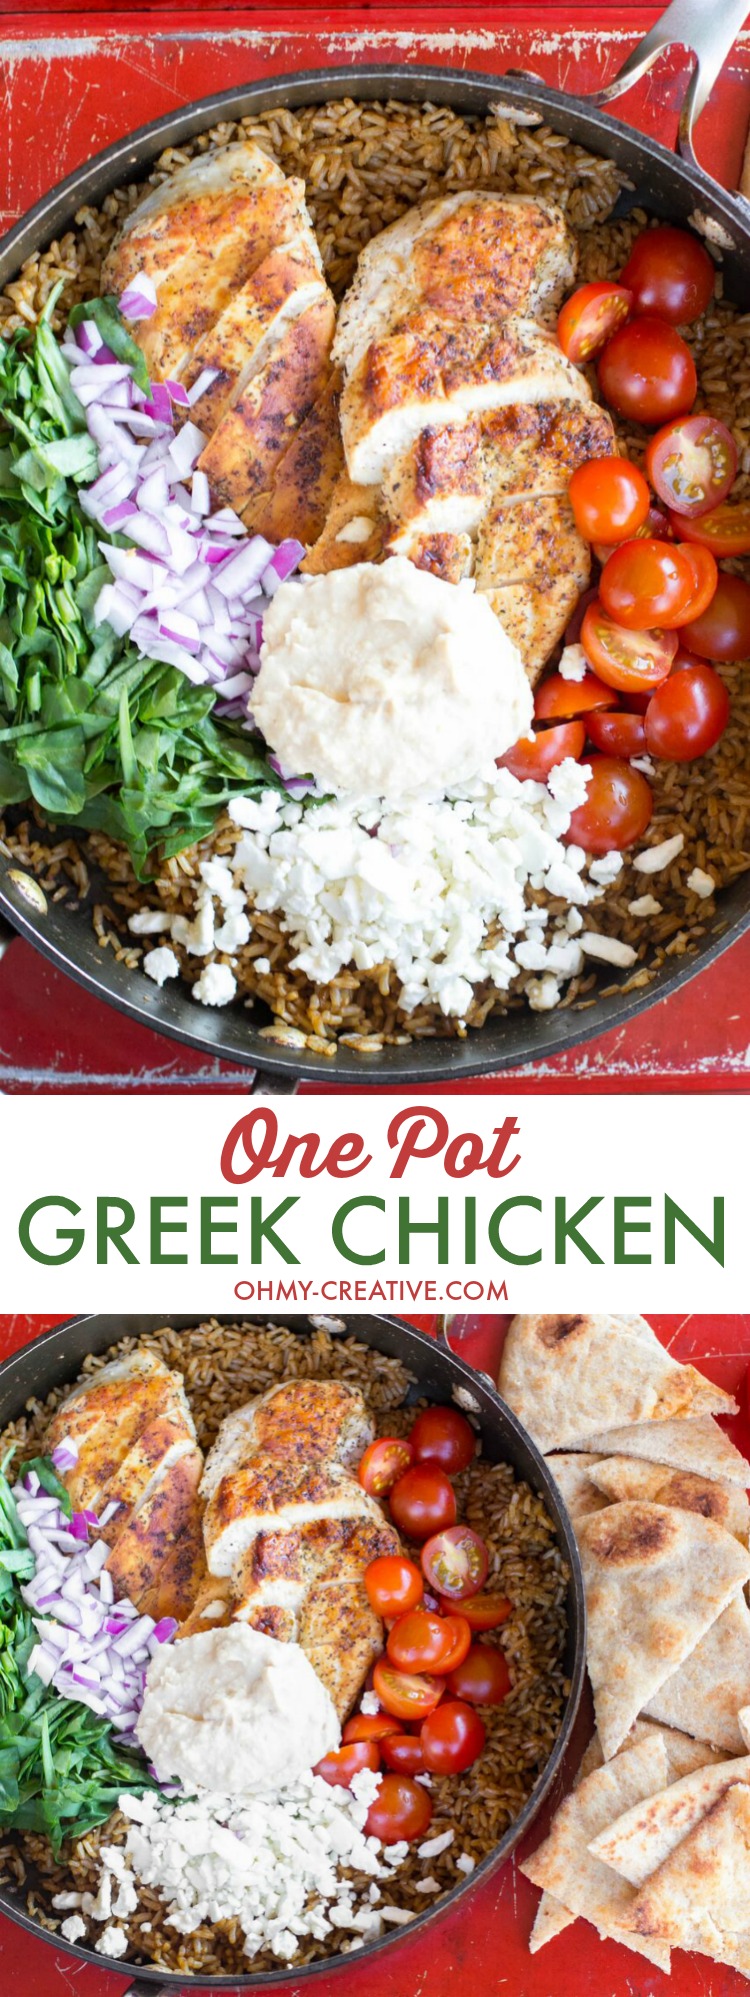 I absolutely love Mediterranean flavors like what's in this One Pot Greek Chicken and Rice recipe! Garden fresh tomatoes, hummus and perfectly seasoned chicken topped with feta cheese will have the family asking for more Greek food! Popular Pins!  | OHMY-CREATIVE.COM